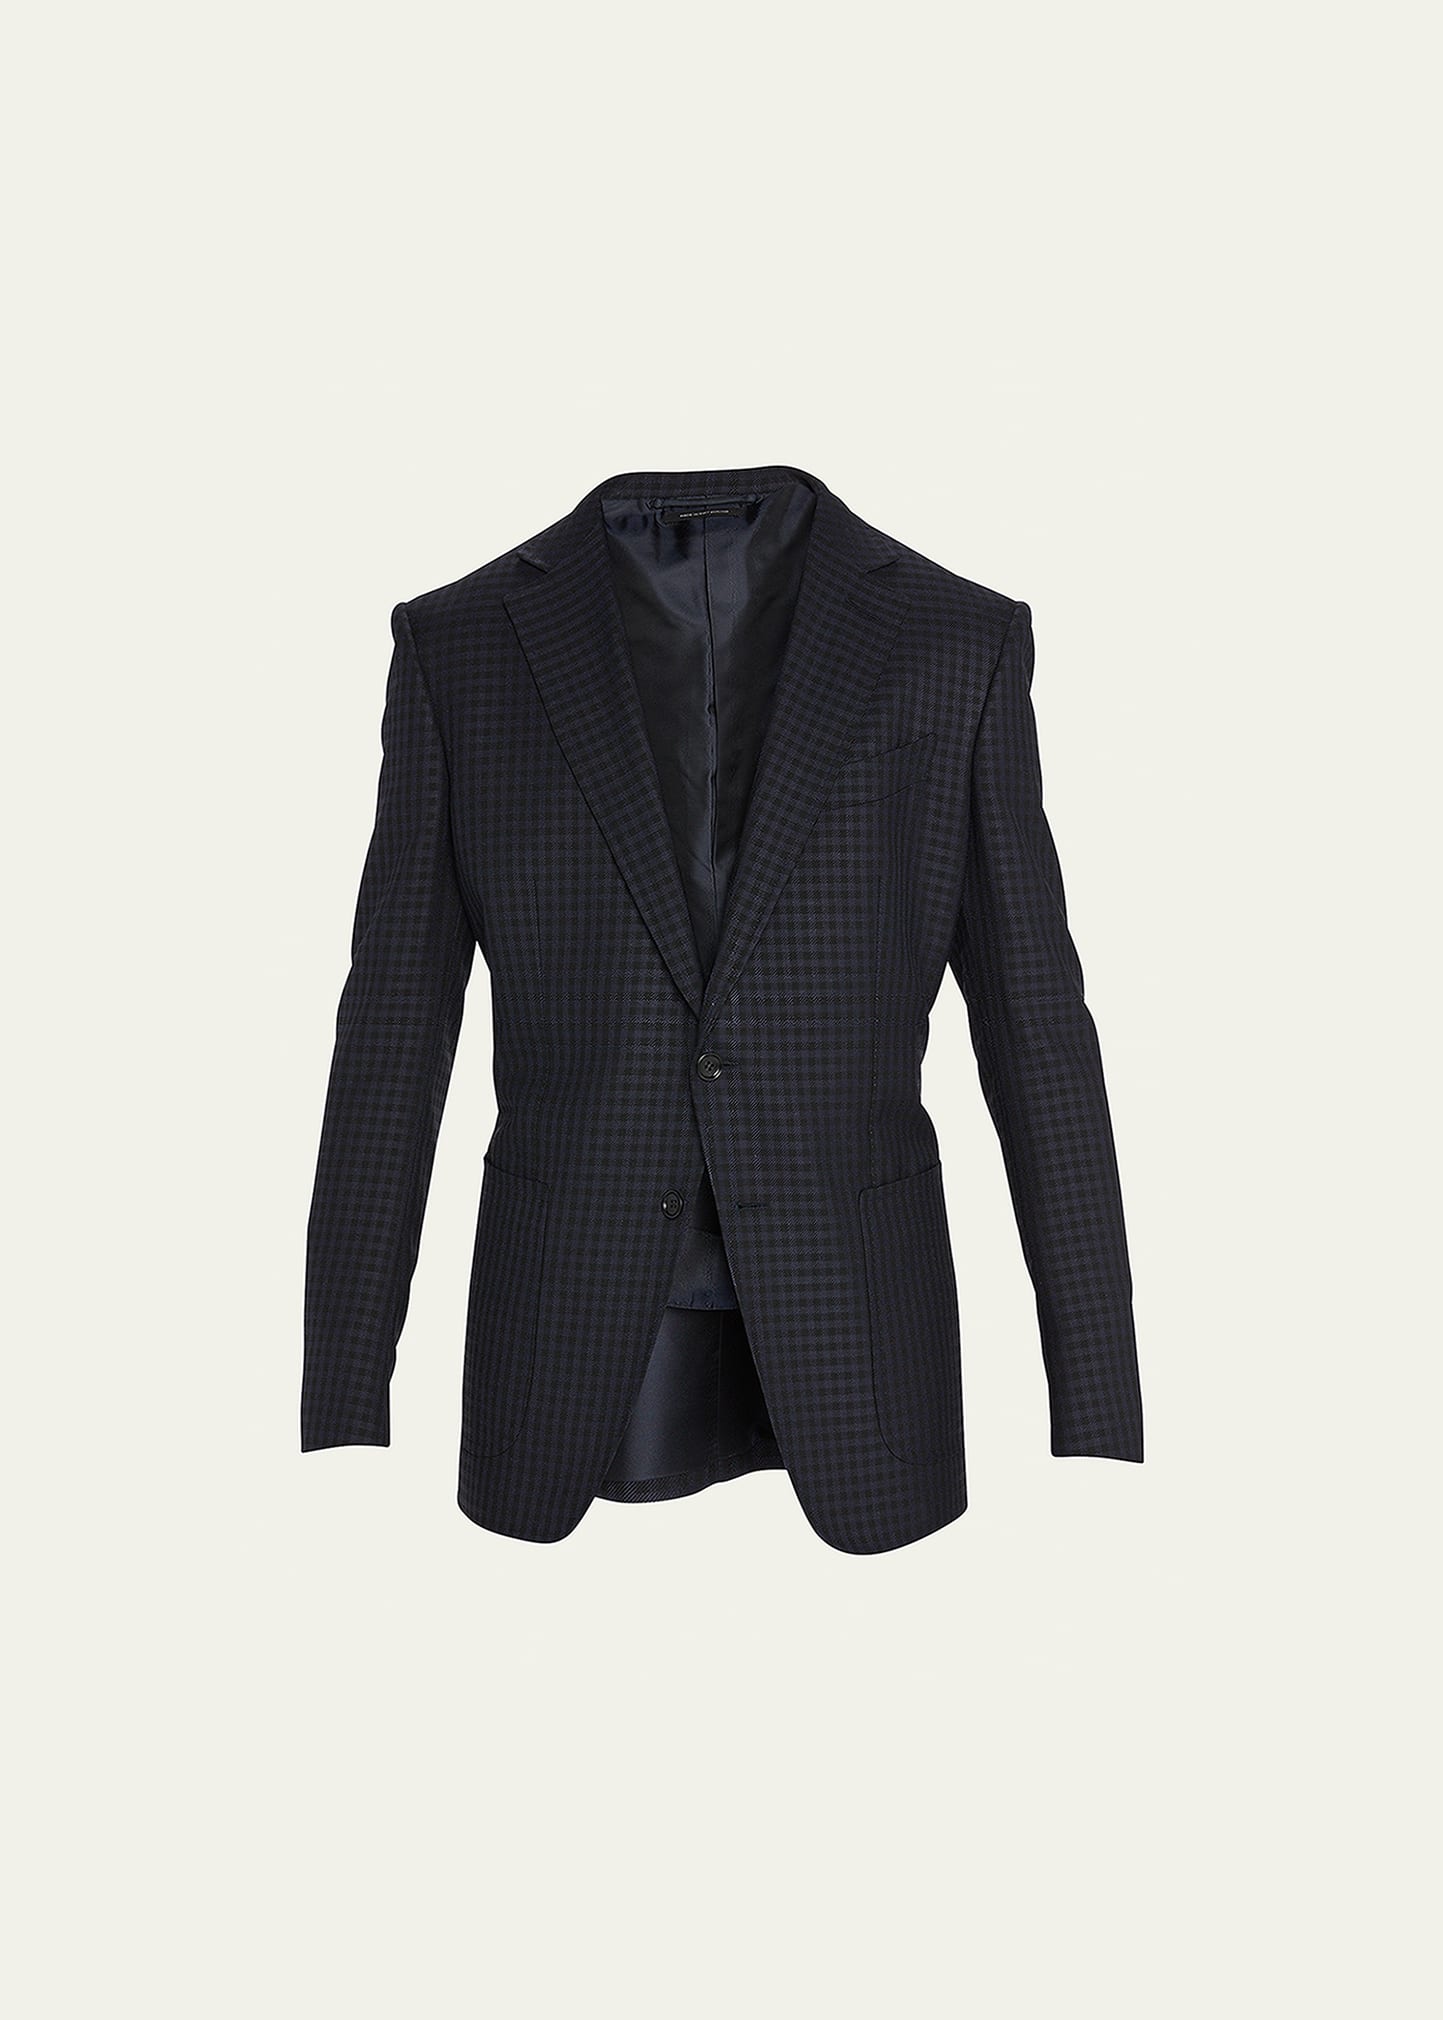 Tom Ford Men's Small Box Wool-blend Sport Jacket In Blue Navy Check